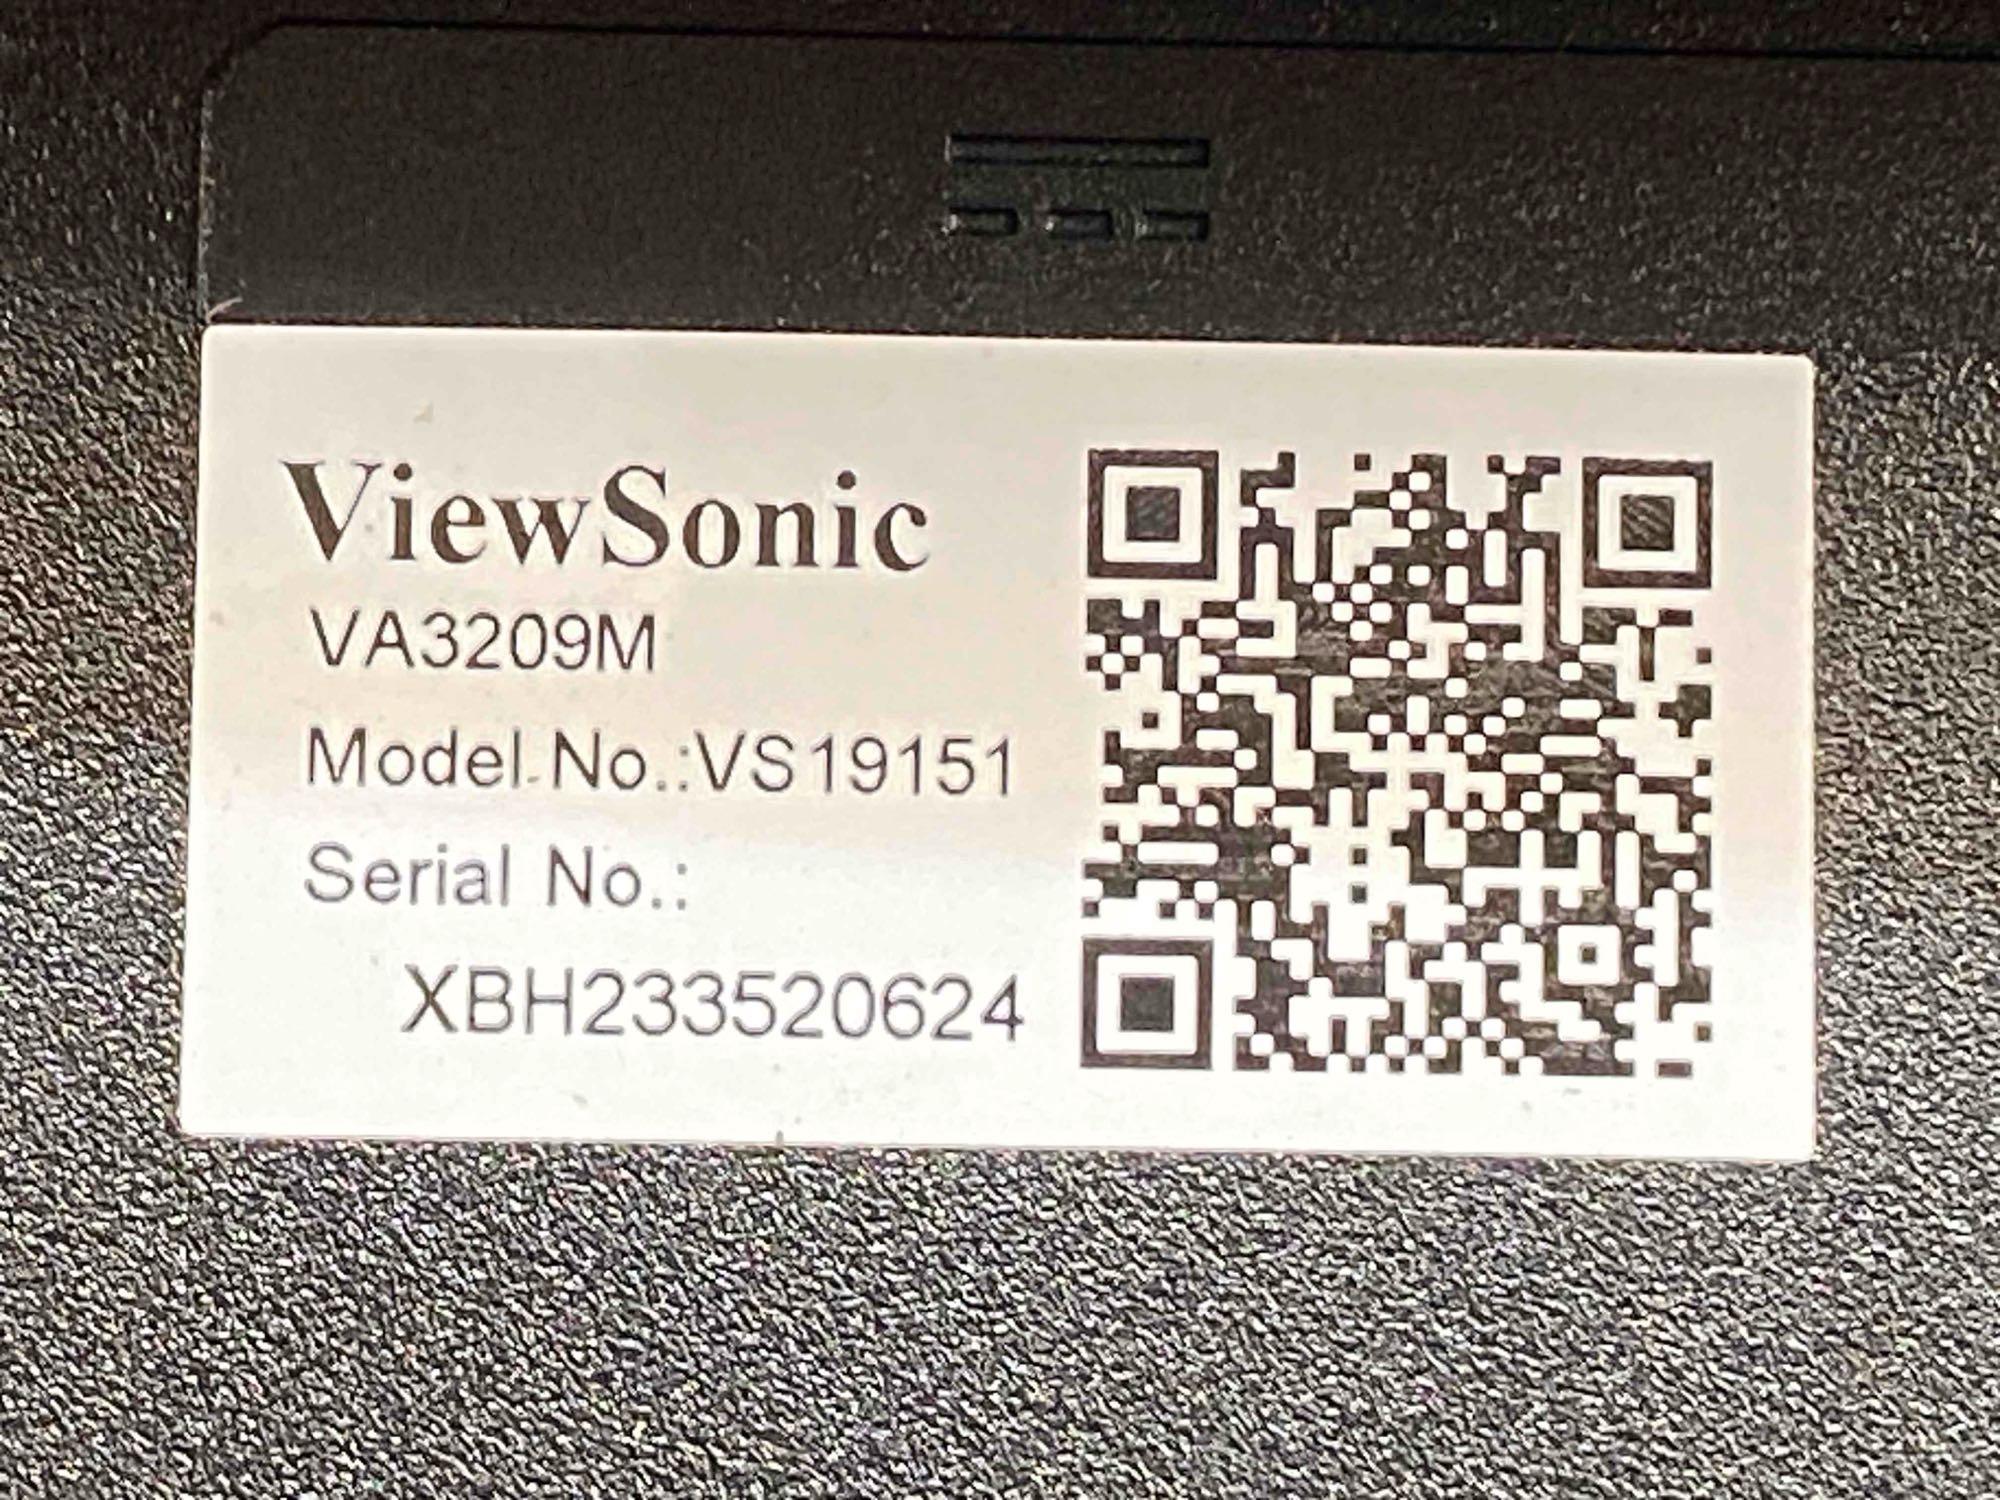 ViewSonic 32 16:9 (31.5) 1920 x 1080 SuperClear IPS LED Monitor